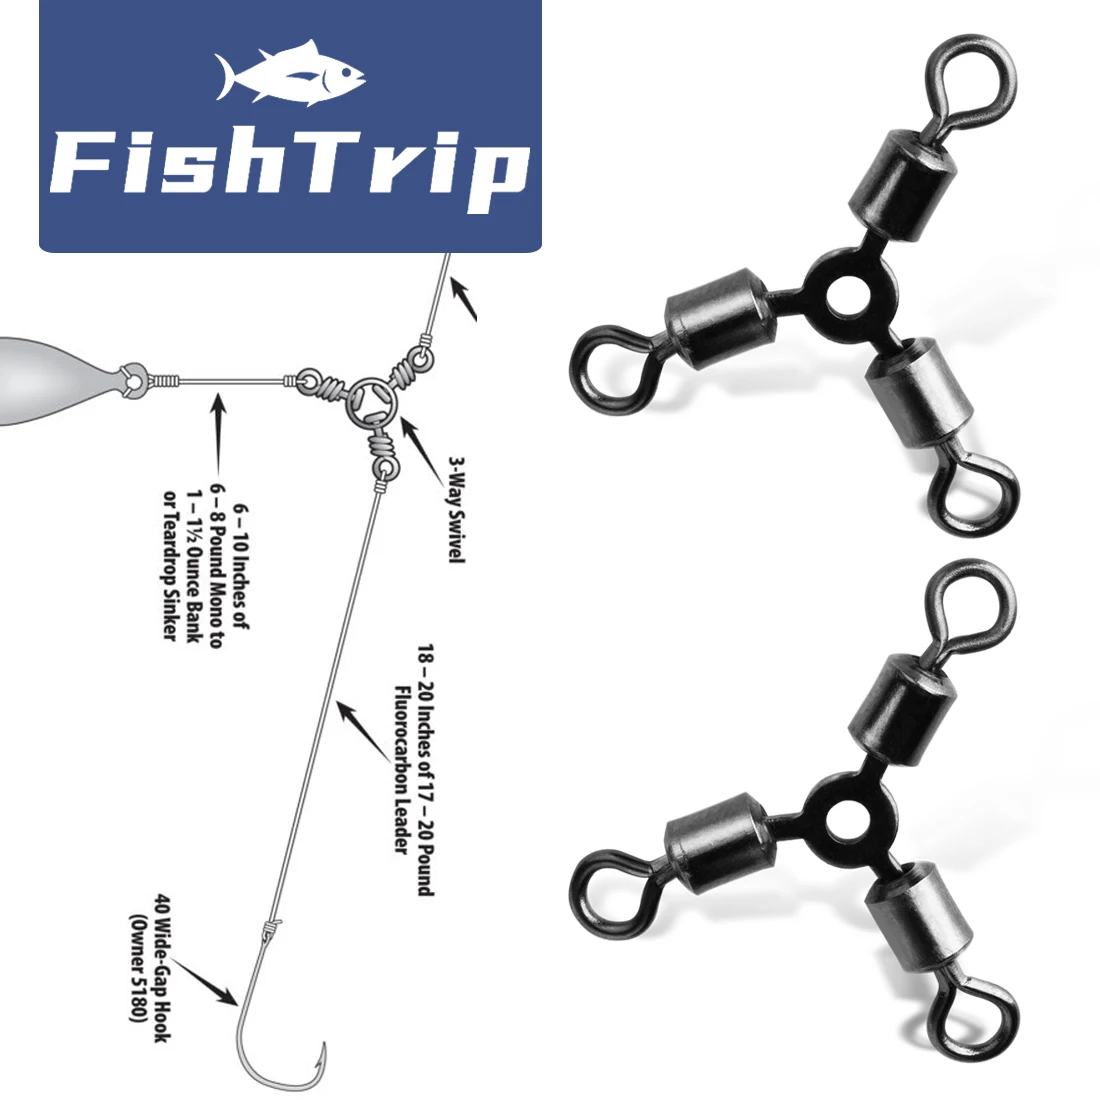 https://ae01.alicdn.com/kf/S67a95b88980742dfb314bbeaa0ca2b1aW/FishTrip-Three-Way-Swivels-O-shape-for-Catfish-Rig-Bottom-Bouncing-Rig-Stainless-Steel-Fishing-Tackle.jpg